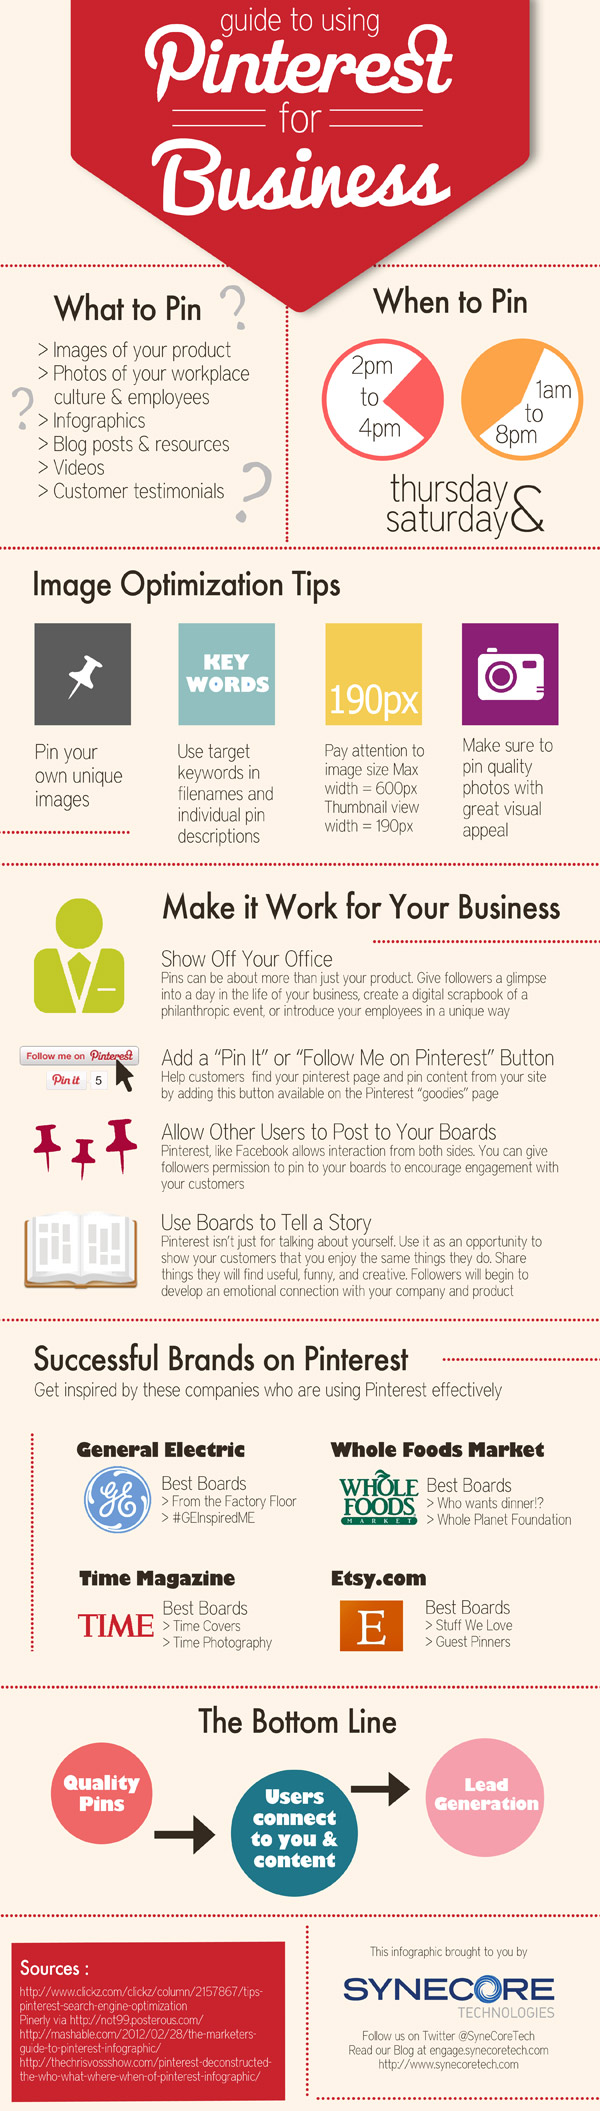 Guide to Using Pinterest for Business